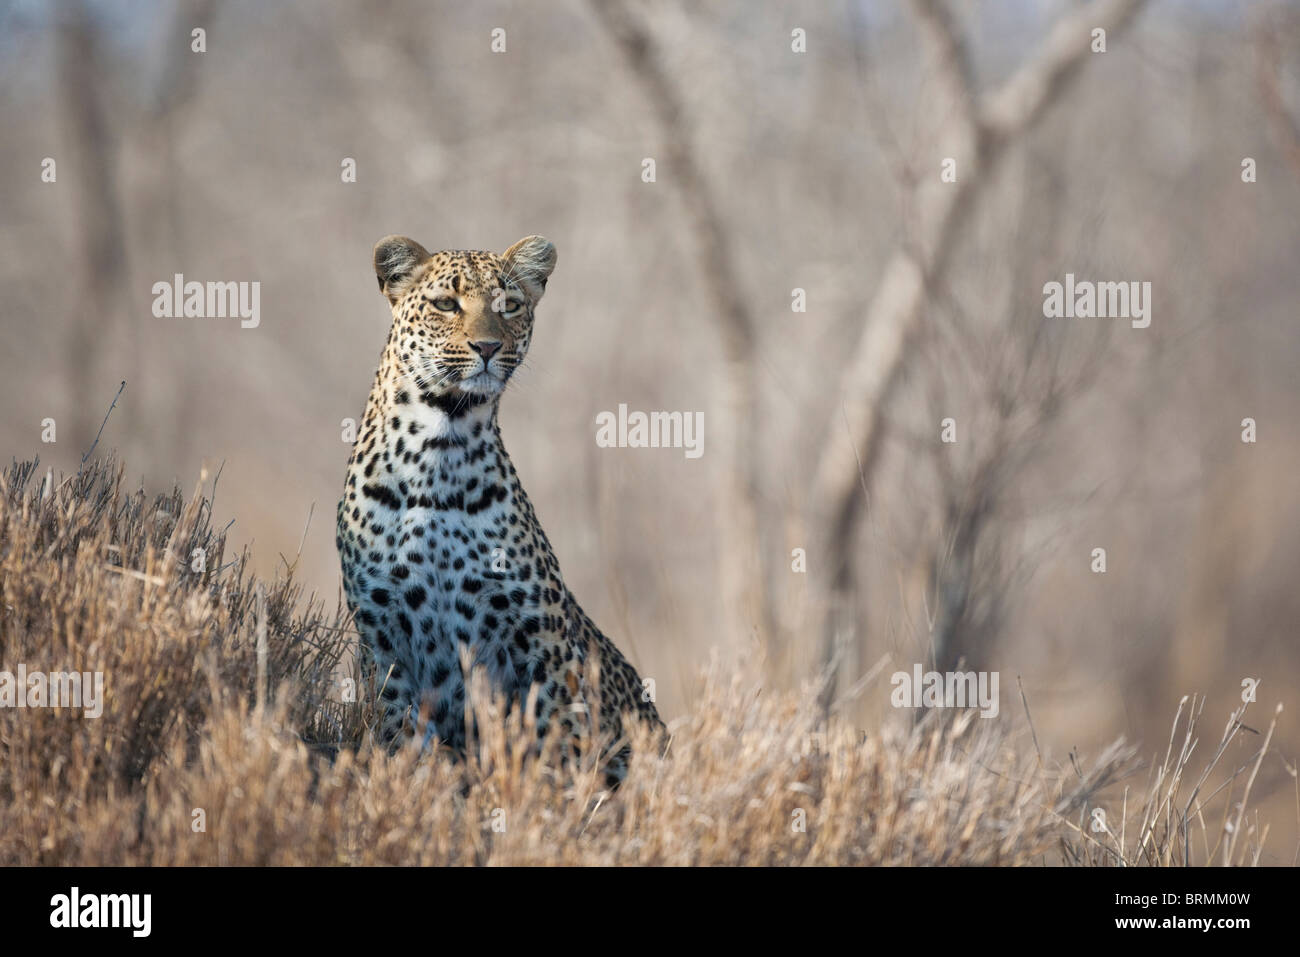 Leopard sitting upright staring intently Stock Photo